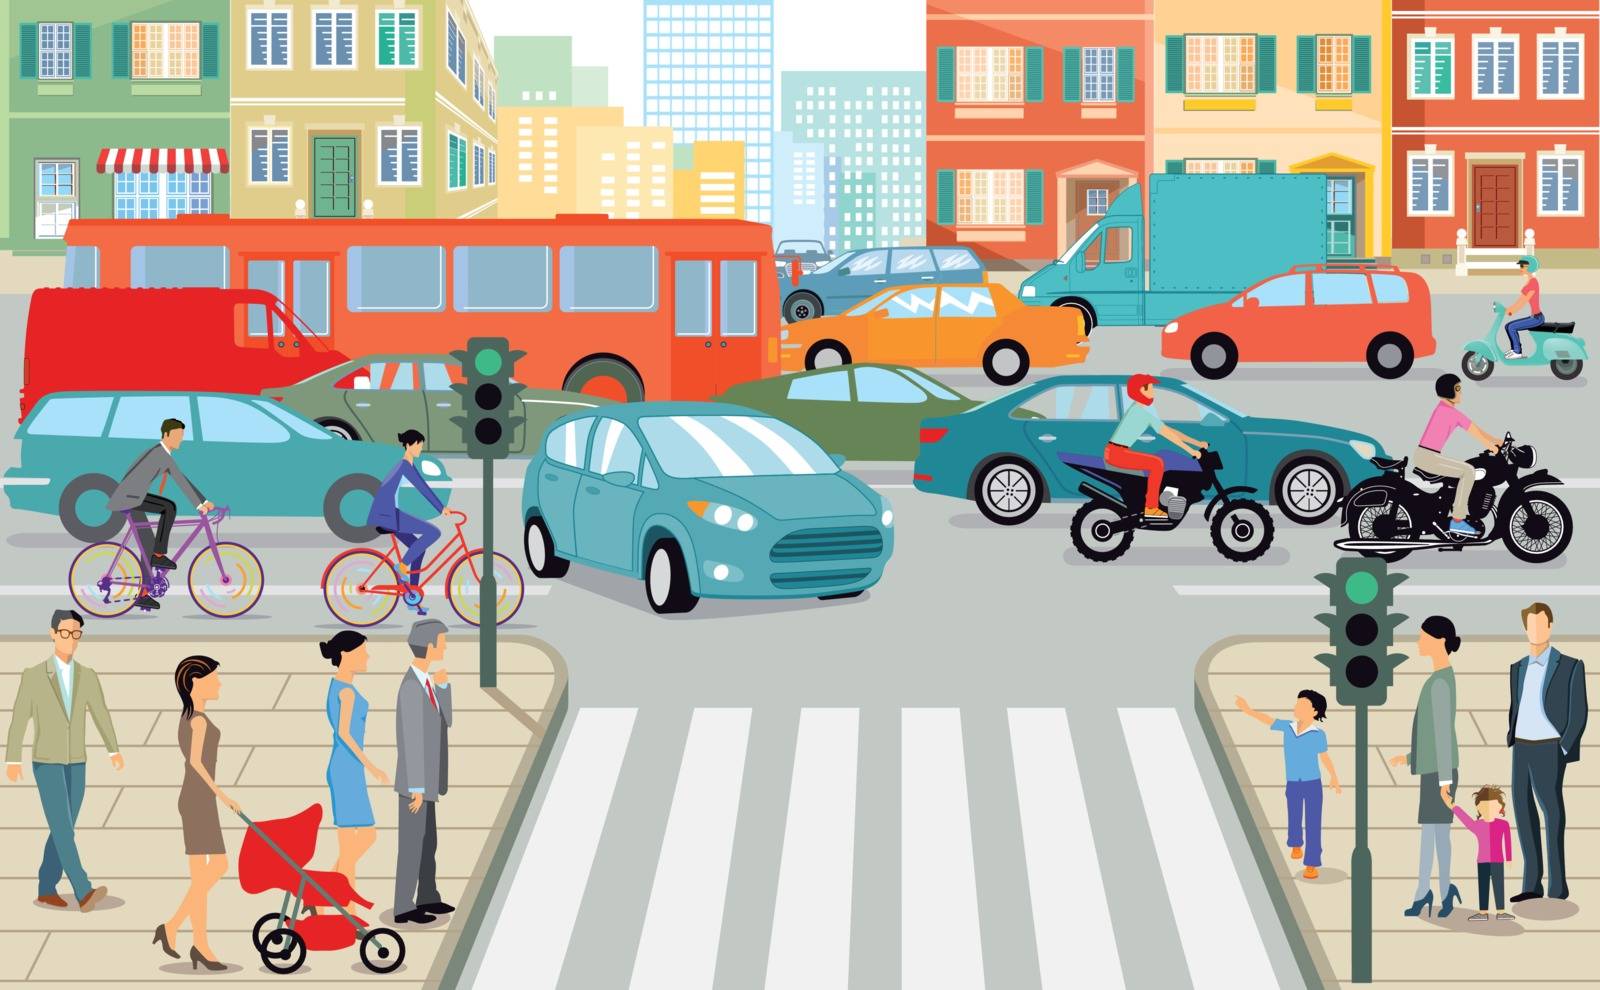 Road traffic in the city, illustration by scusi